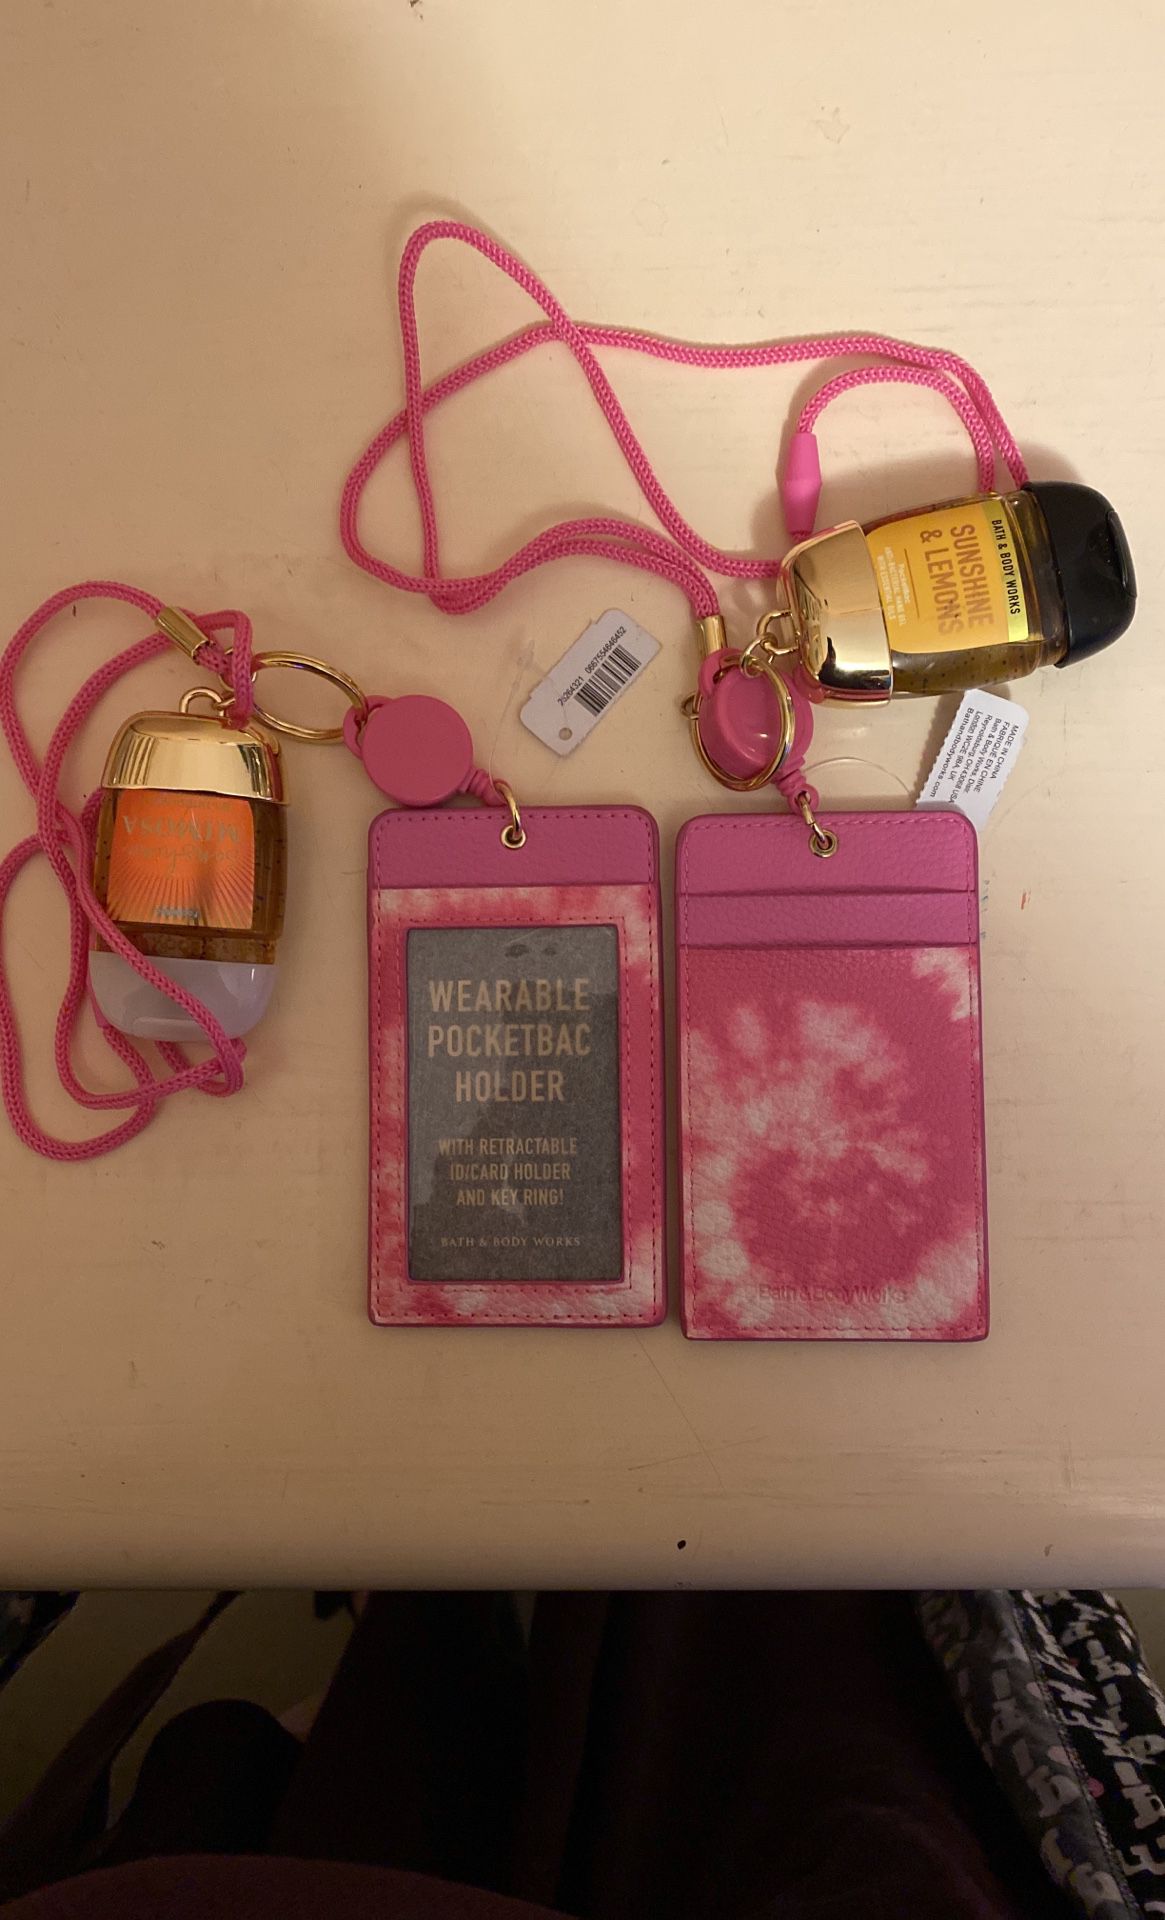 Bath Body Works Wearable Pocketpac Holder with Retractable I’d Holder And Key Ring Neck Bands With Hand Sanitizer $7 Each More Available C My Page Ty